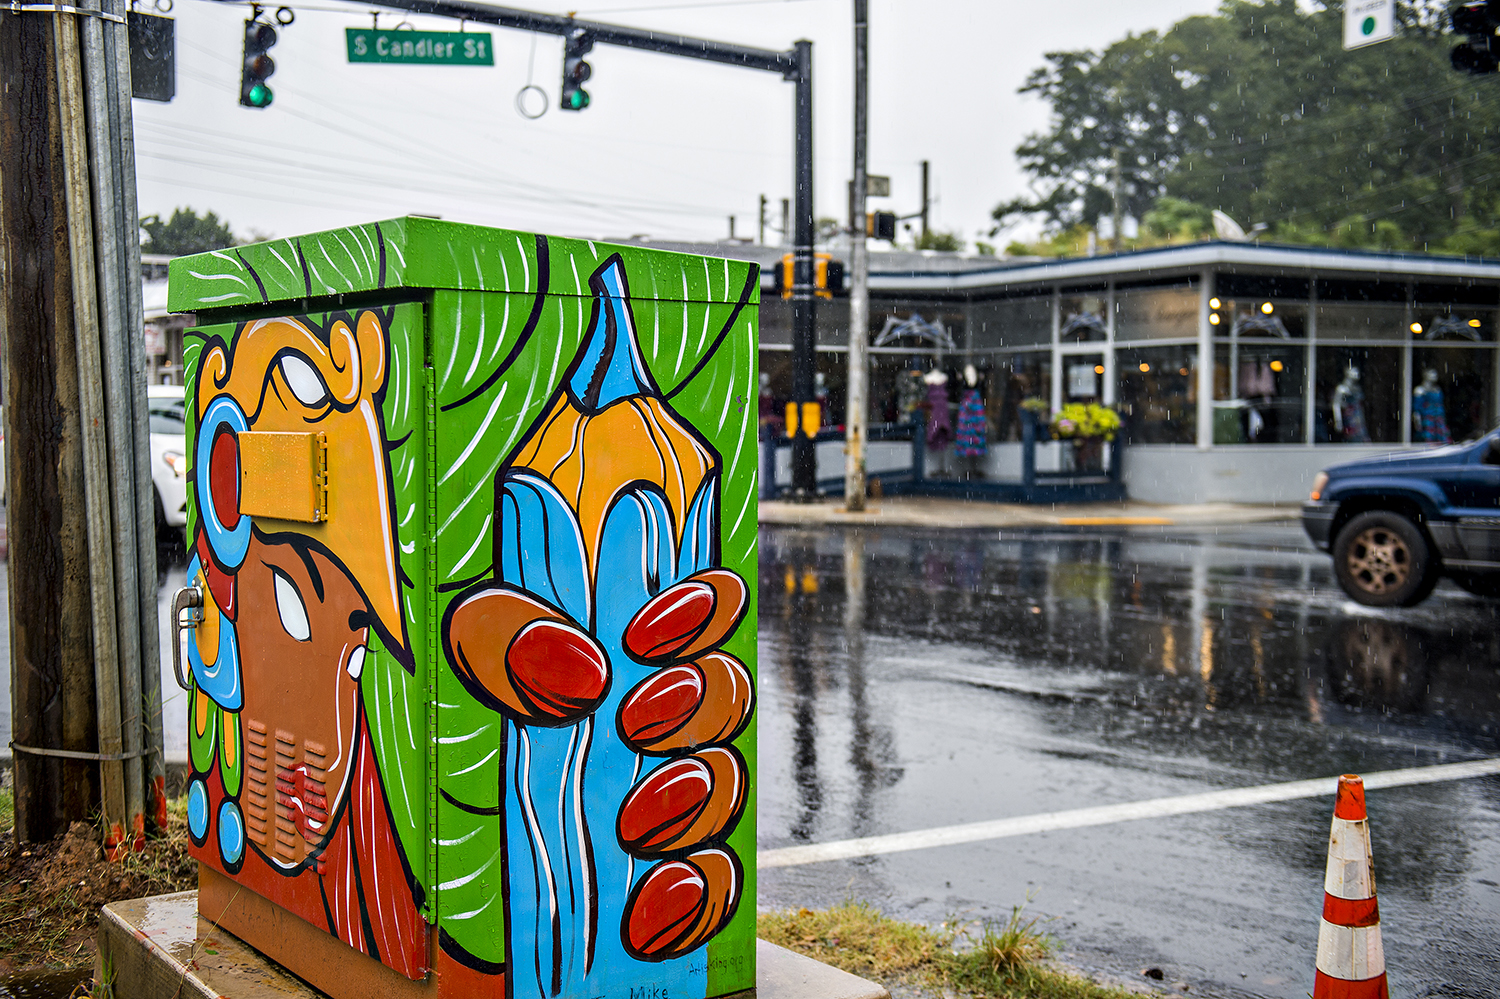 A box painted by Dan Flores in front of Bleu Hanger at the corner of East College Avenue and South Candler Street.&nbsp;